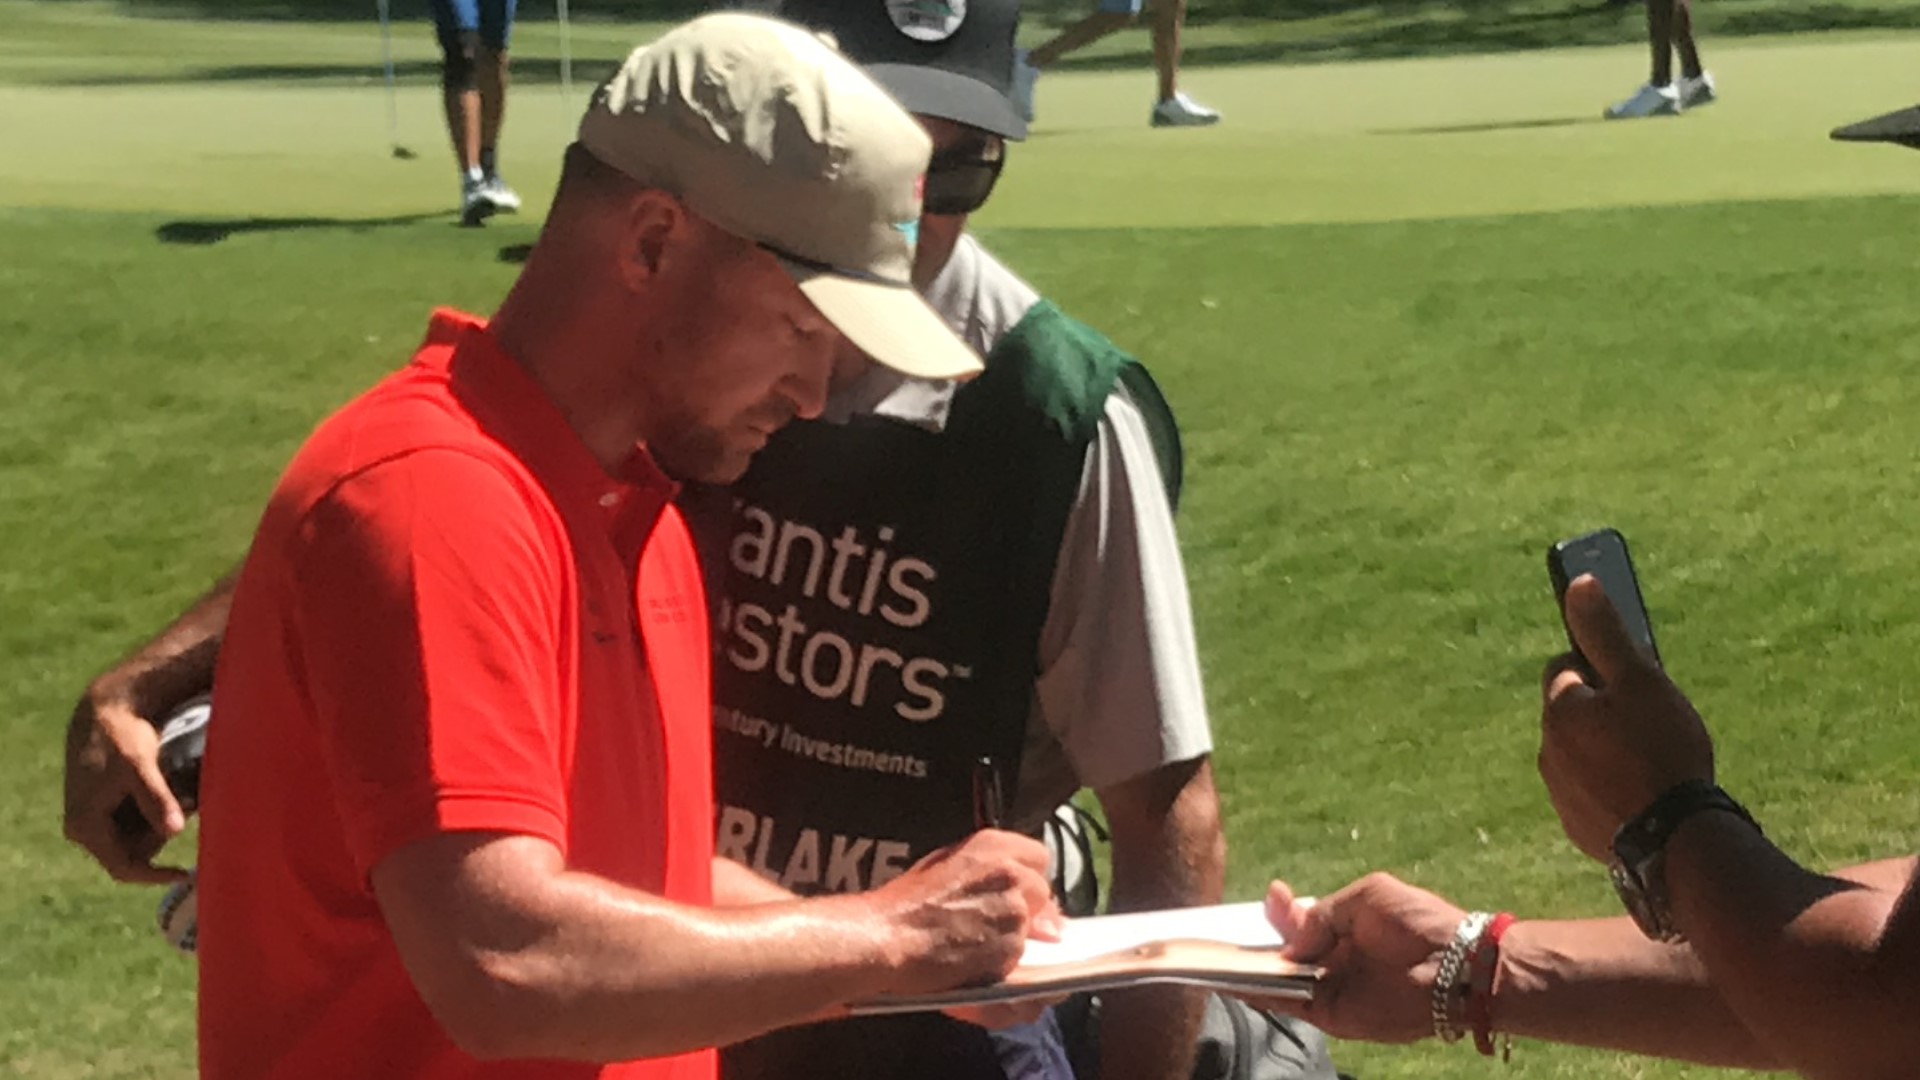 Some of the biggest stars in sports and entertainment are descending upon South Lake Tahoe for the American Century Celebrity Golf Championship at Edgewood Tahoe Golf Course from July 9 - July 14.